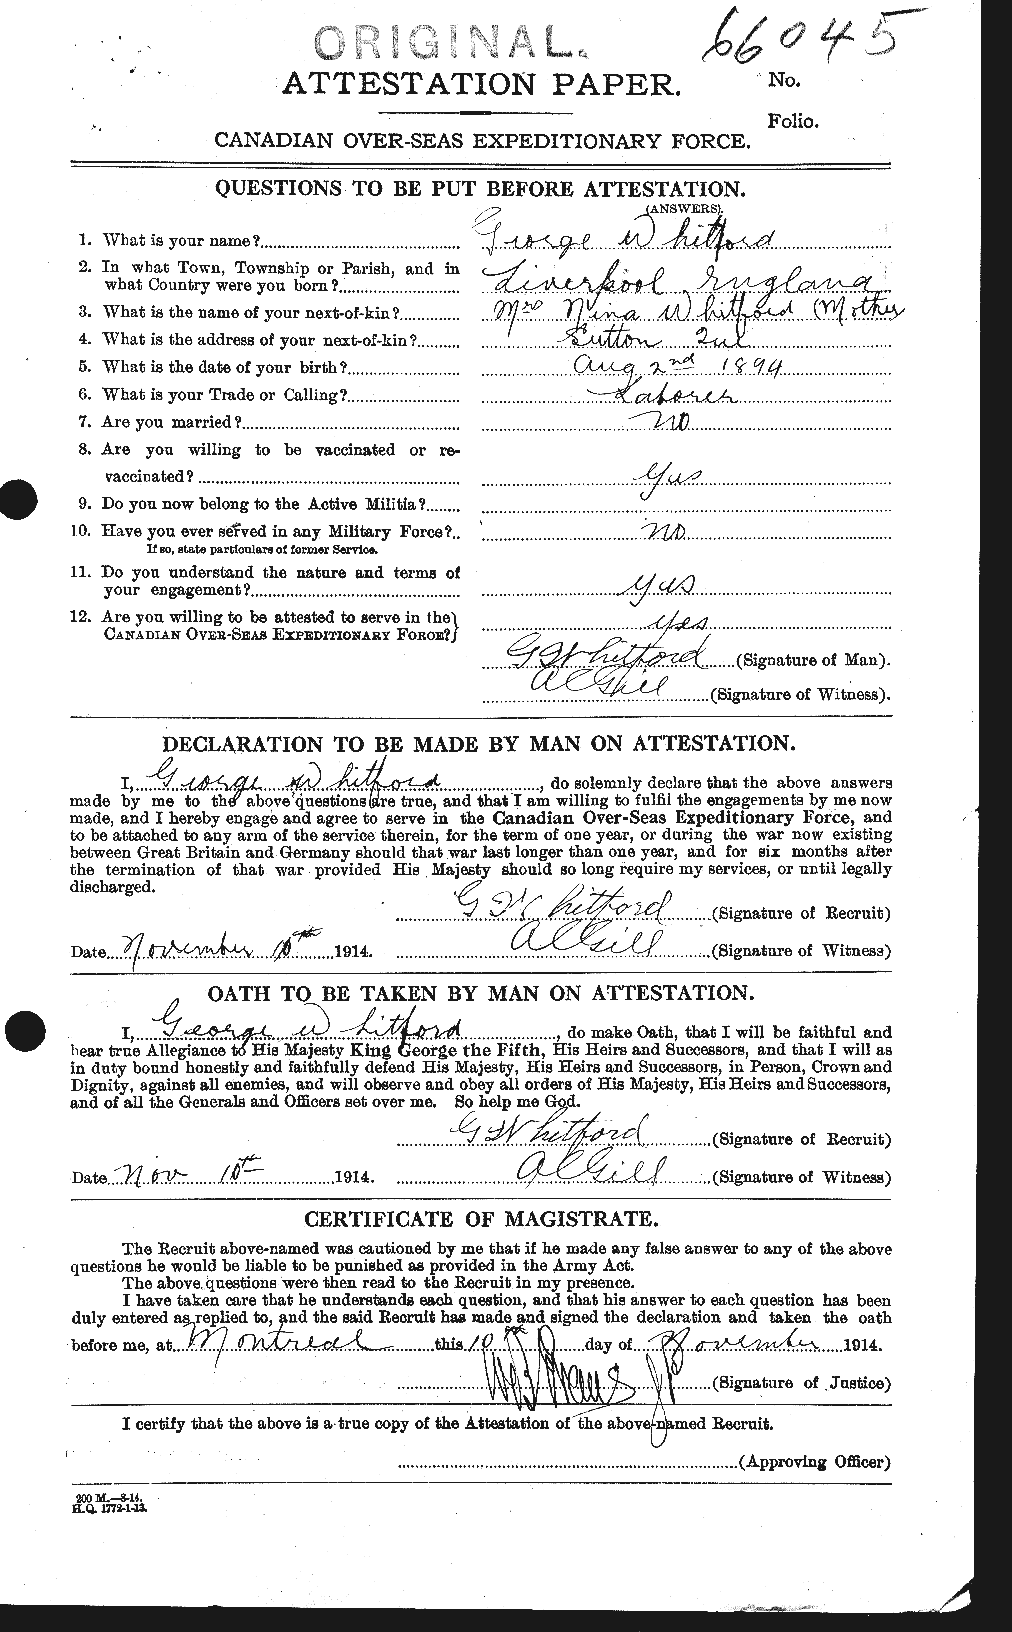 Personnel Records of the First World War - CEF 670758a